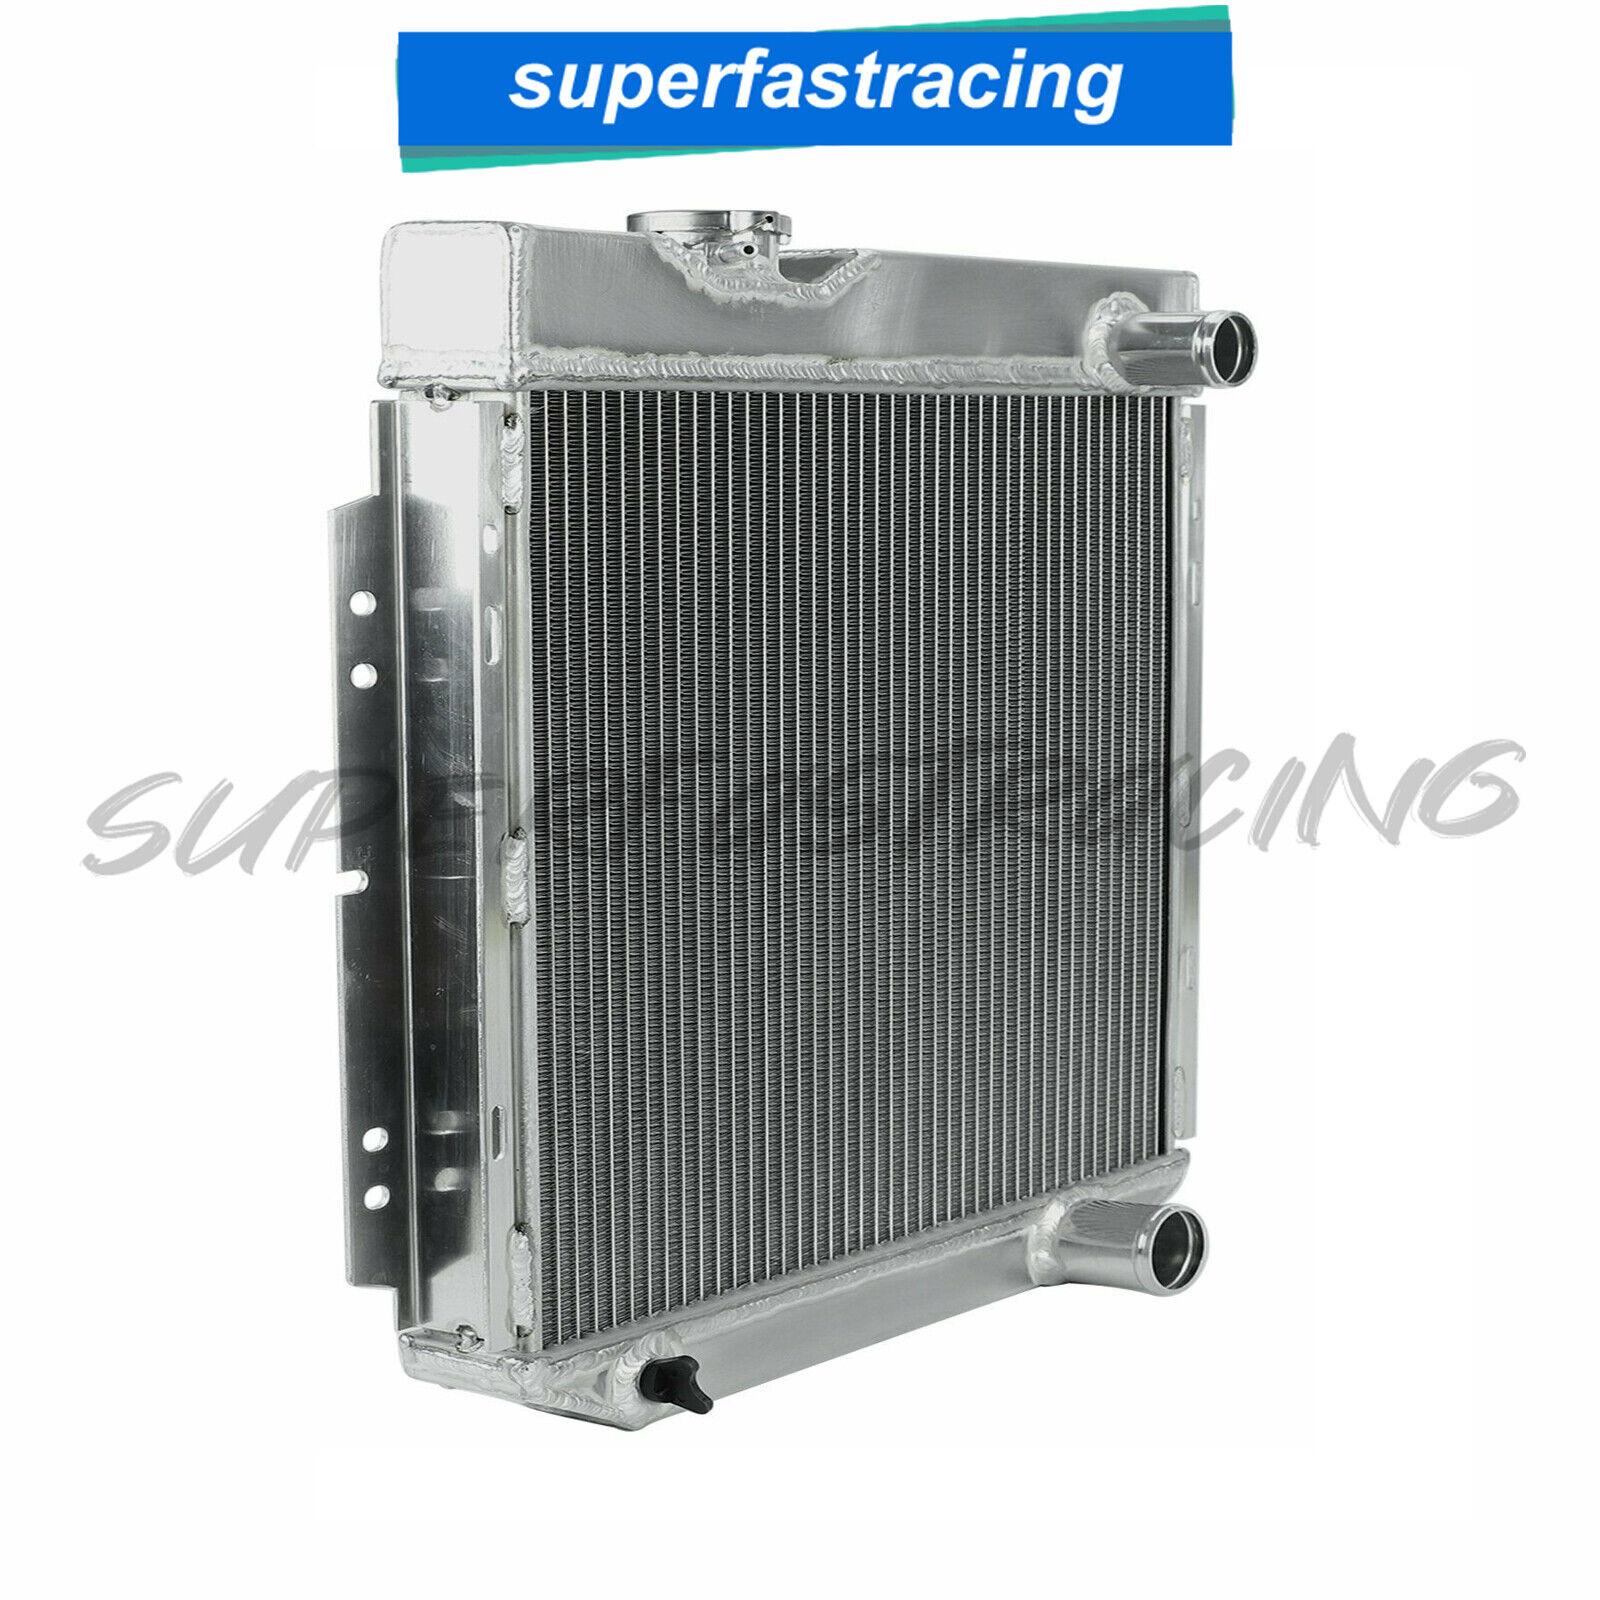 Racing Aluminum 3 Row Radiator For 1964-66 Ford Mustang 60-65 Falcon Comet V8 MT